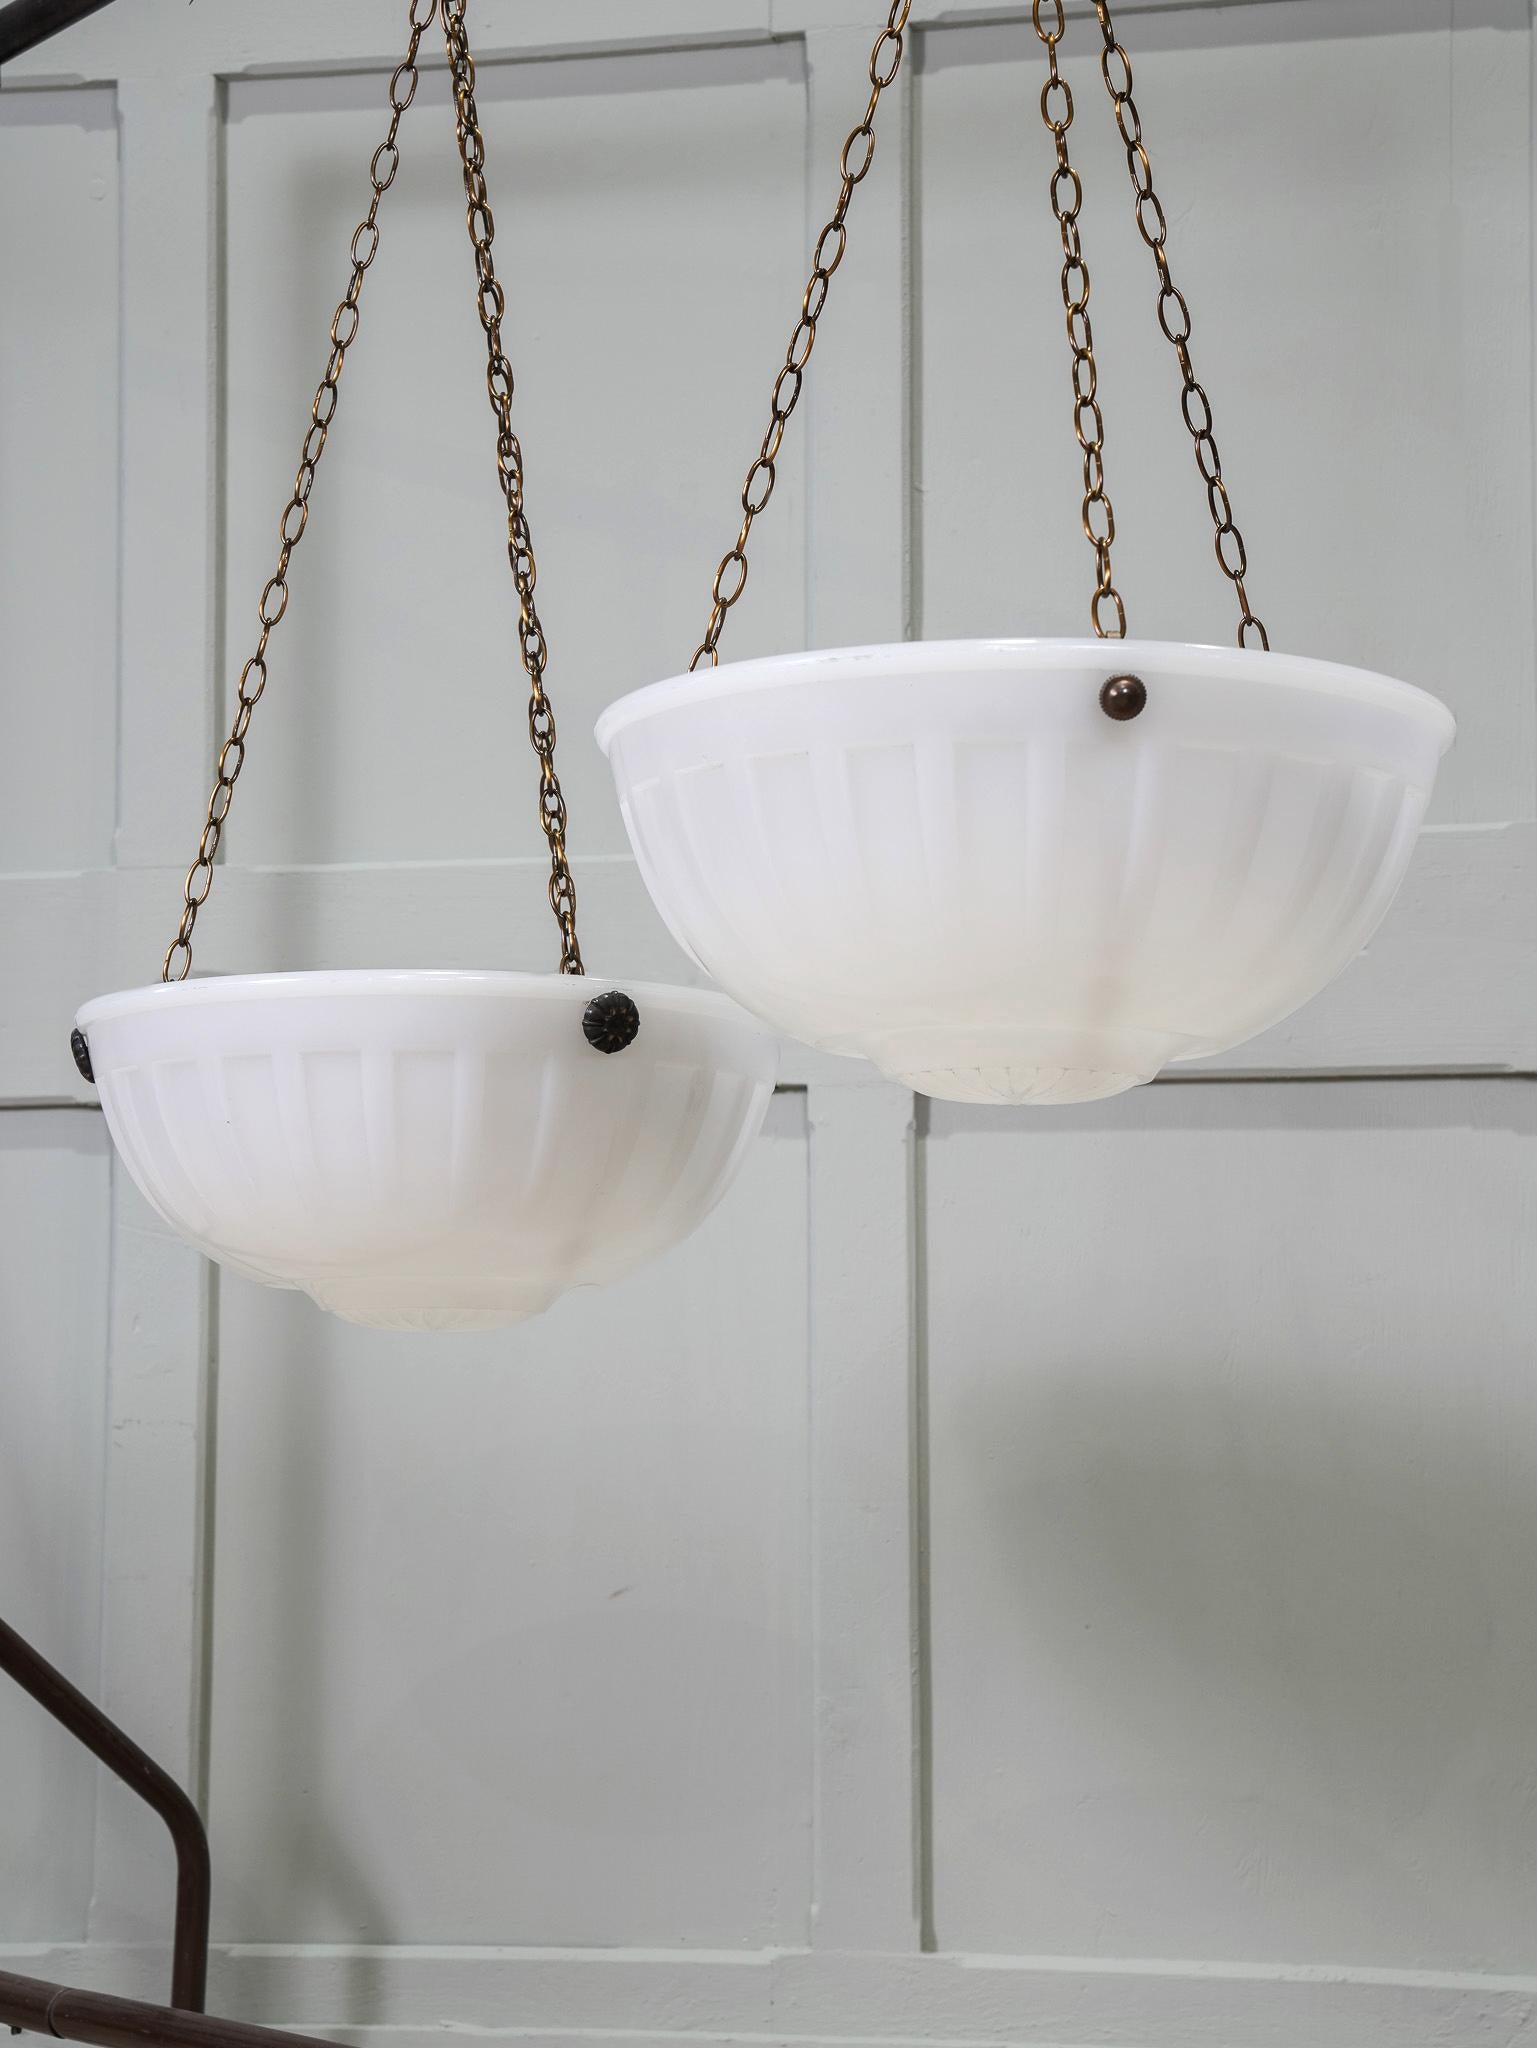 A pair of large opaline glass plaffonier ceiling lights by Jefferson.

Price is for the pair.